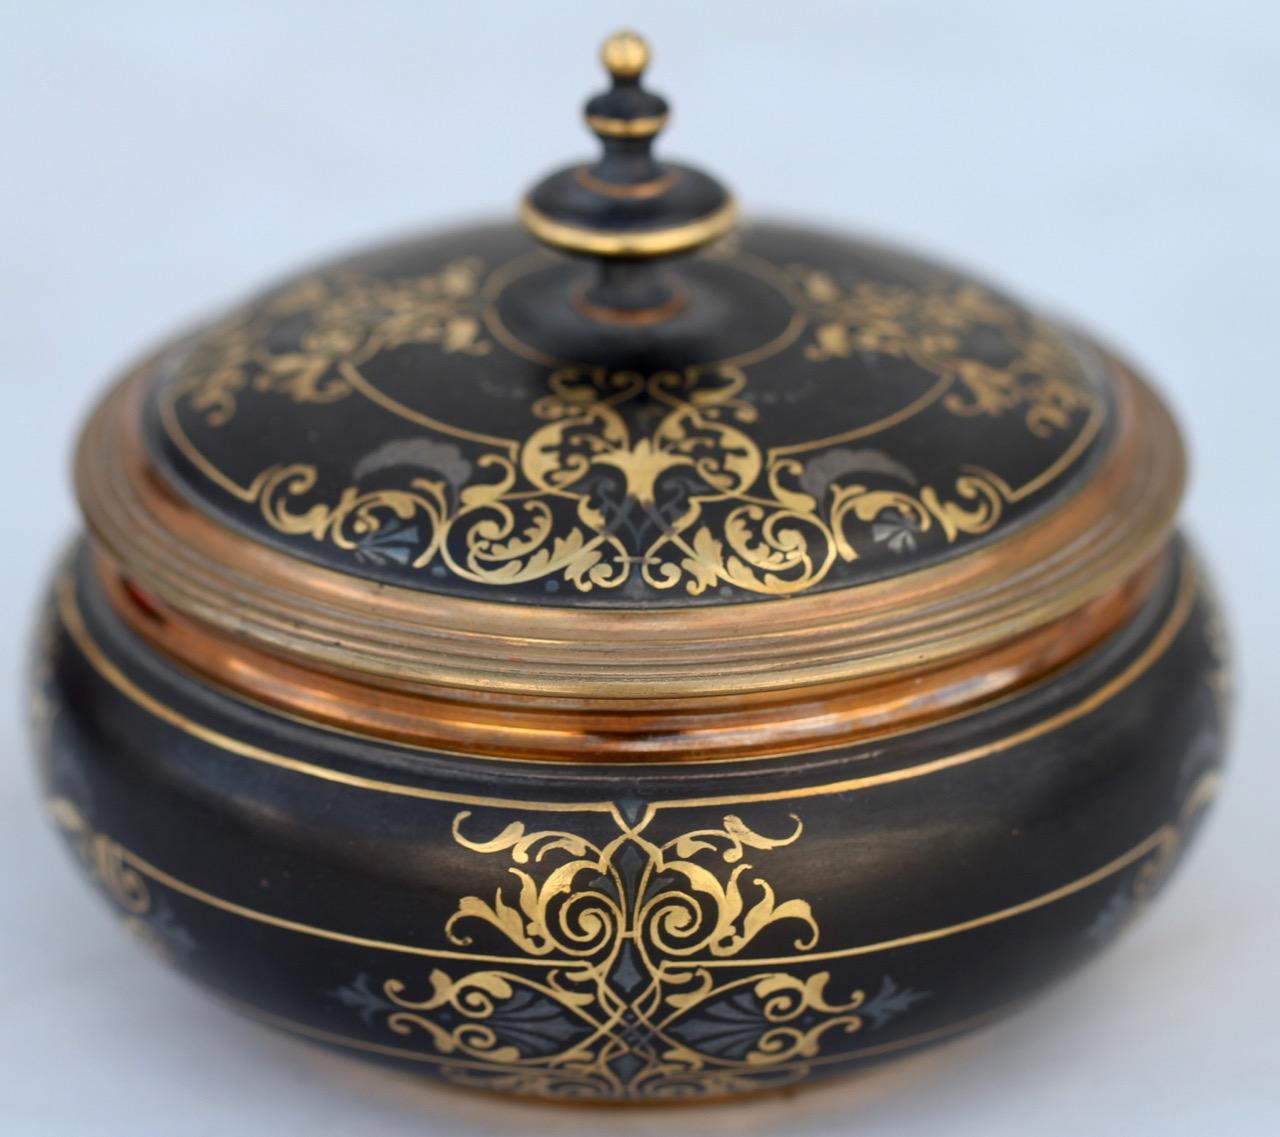 Late 19th Century Ferdinand Barbedienne Damascene Gold and Silver Inlaid Bronze Box